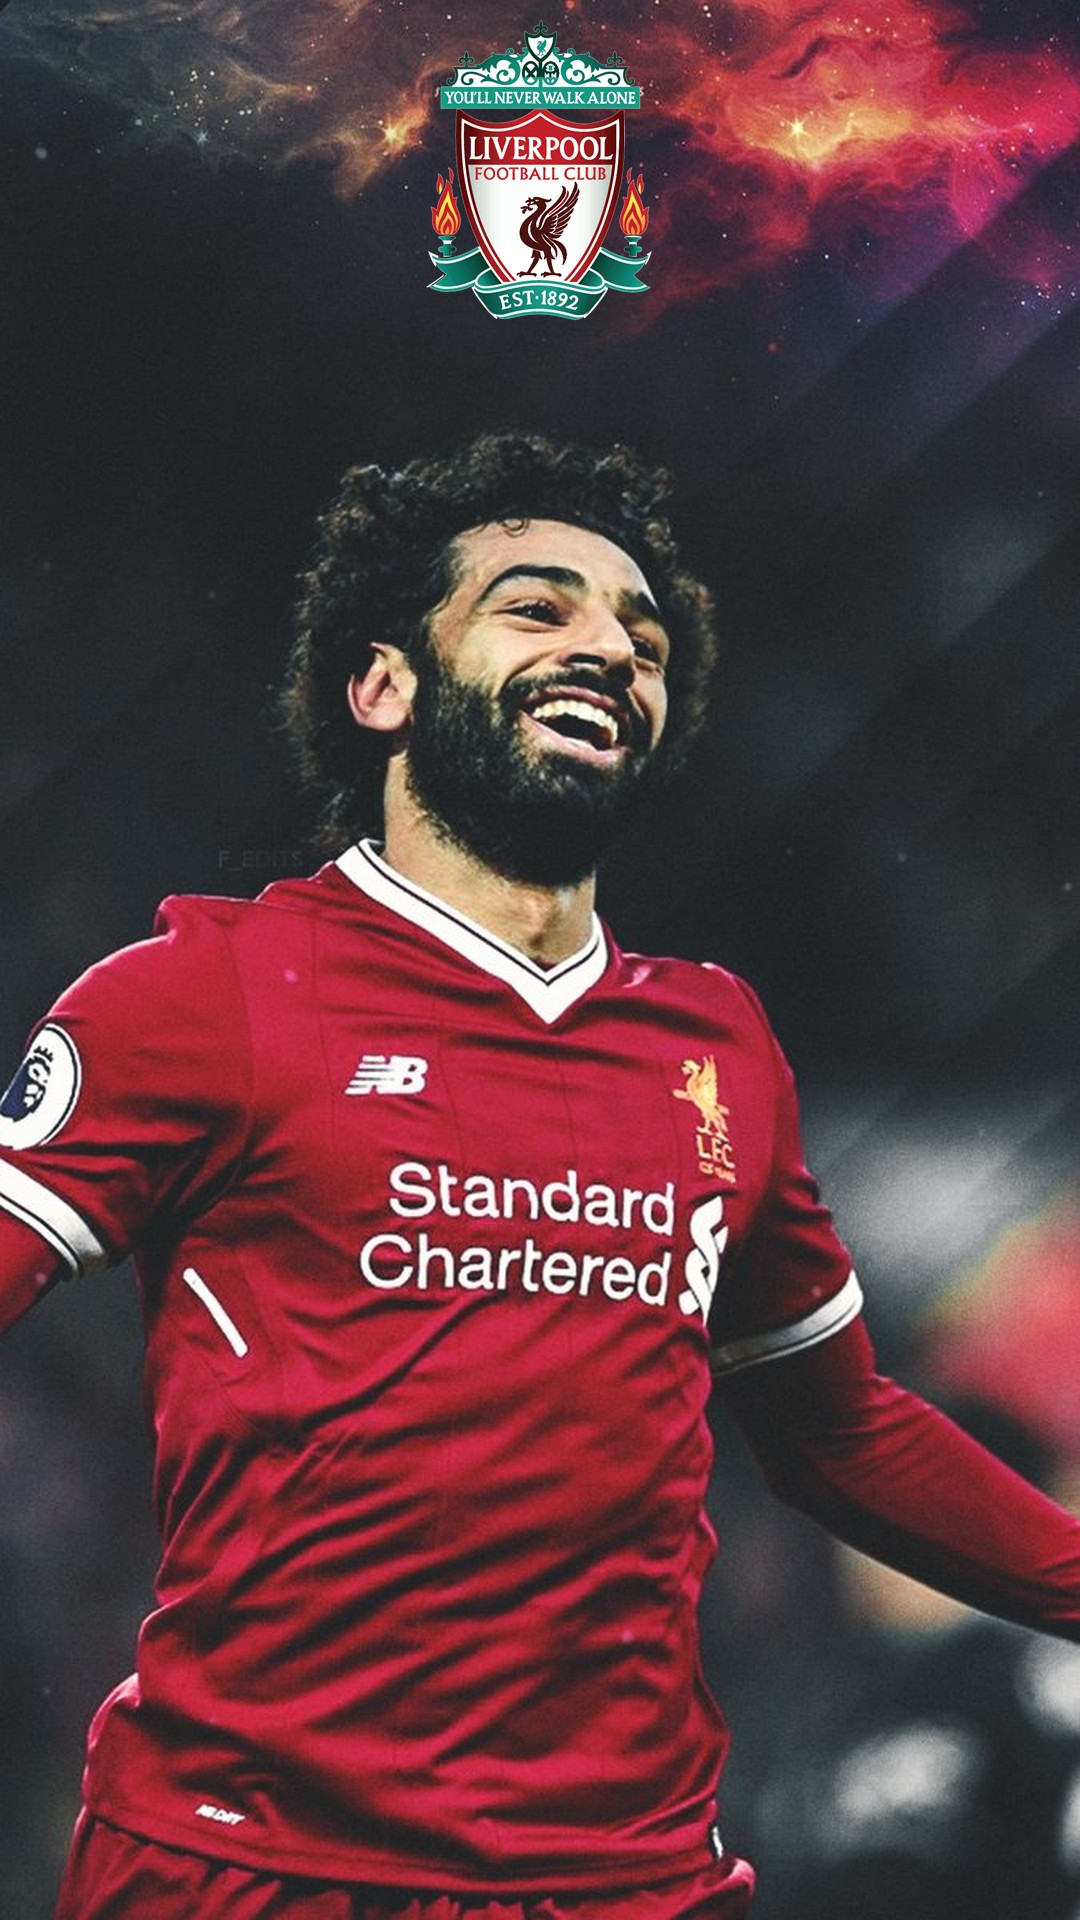 Mobile Wallpapers Mohamed Salah with resolution 1080X1920 pixel. You can make this wallpaper for your iPhone 5, 6, 7, 8, X backgrounds, Mobile Screensaver, or iPad Lock Screen